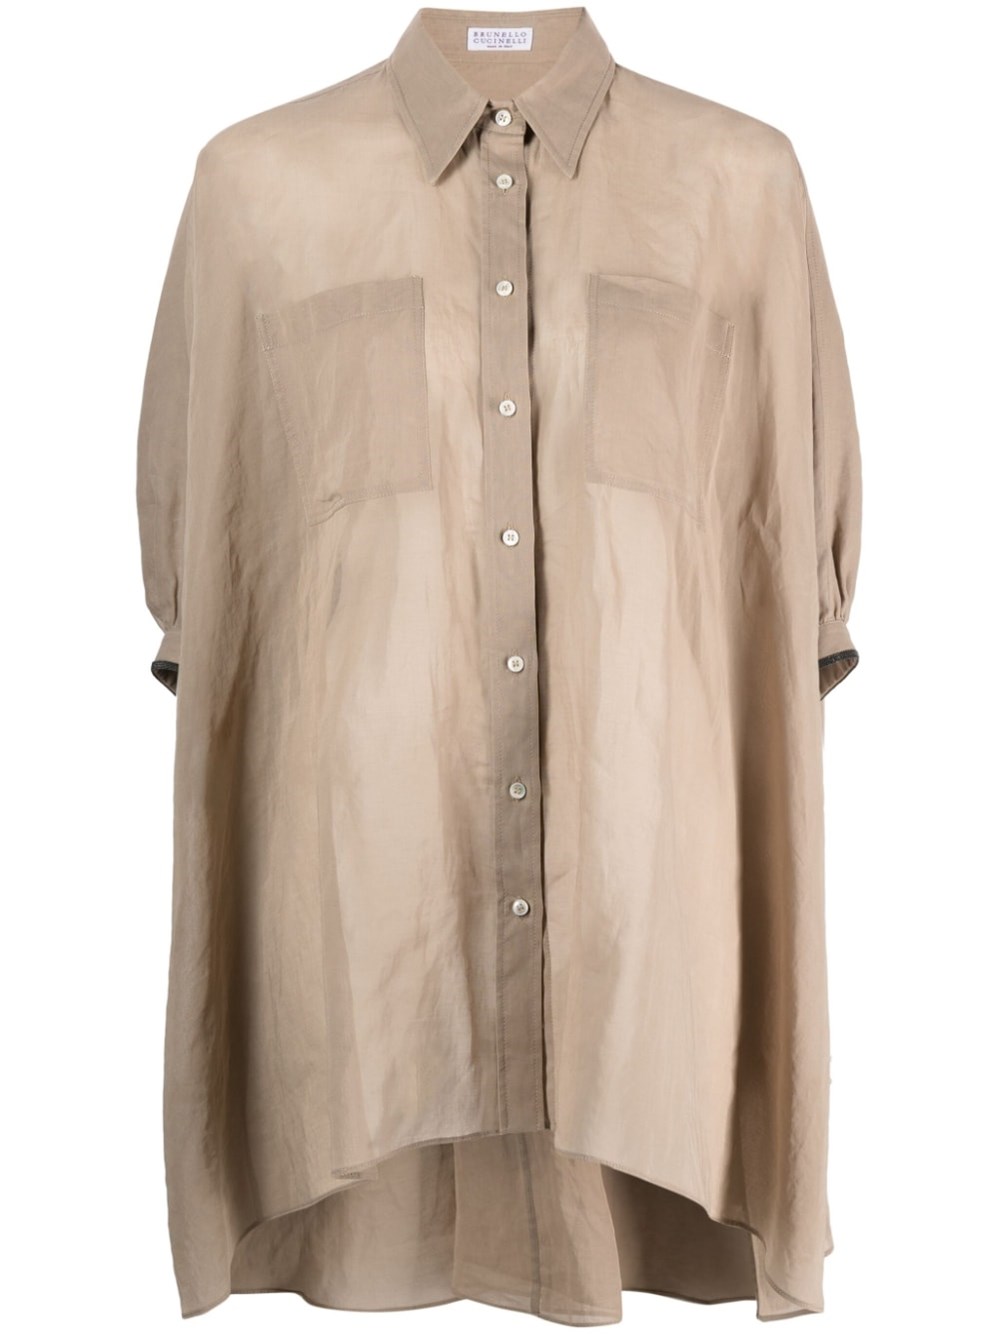 BRUNELLO CUCINELLI FLARED SHIRT WITH SHORT SLEEVES